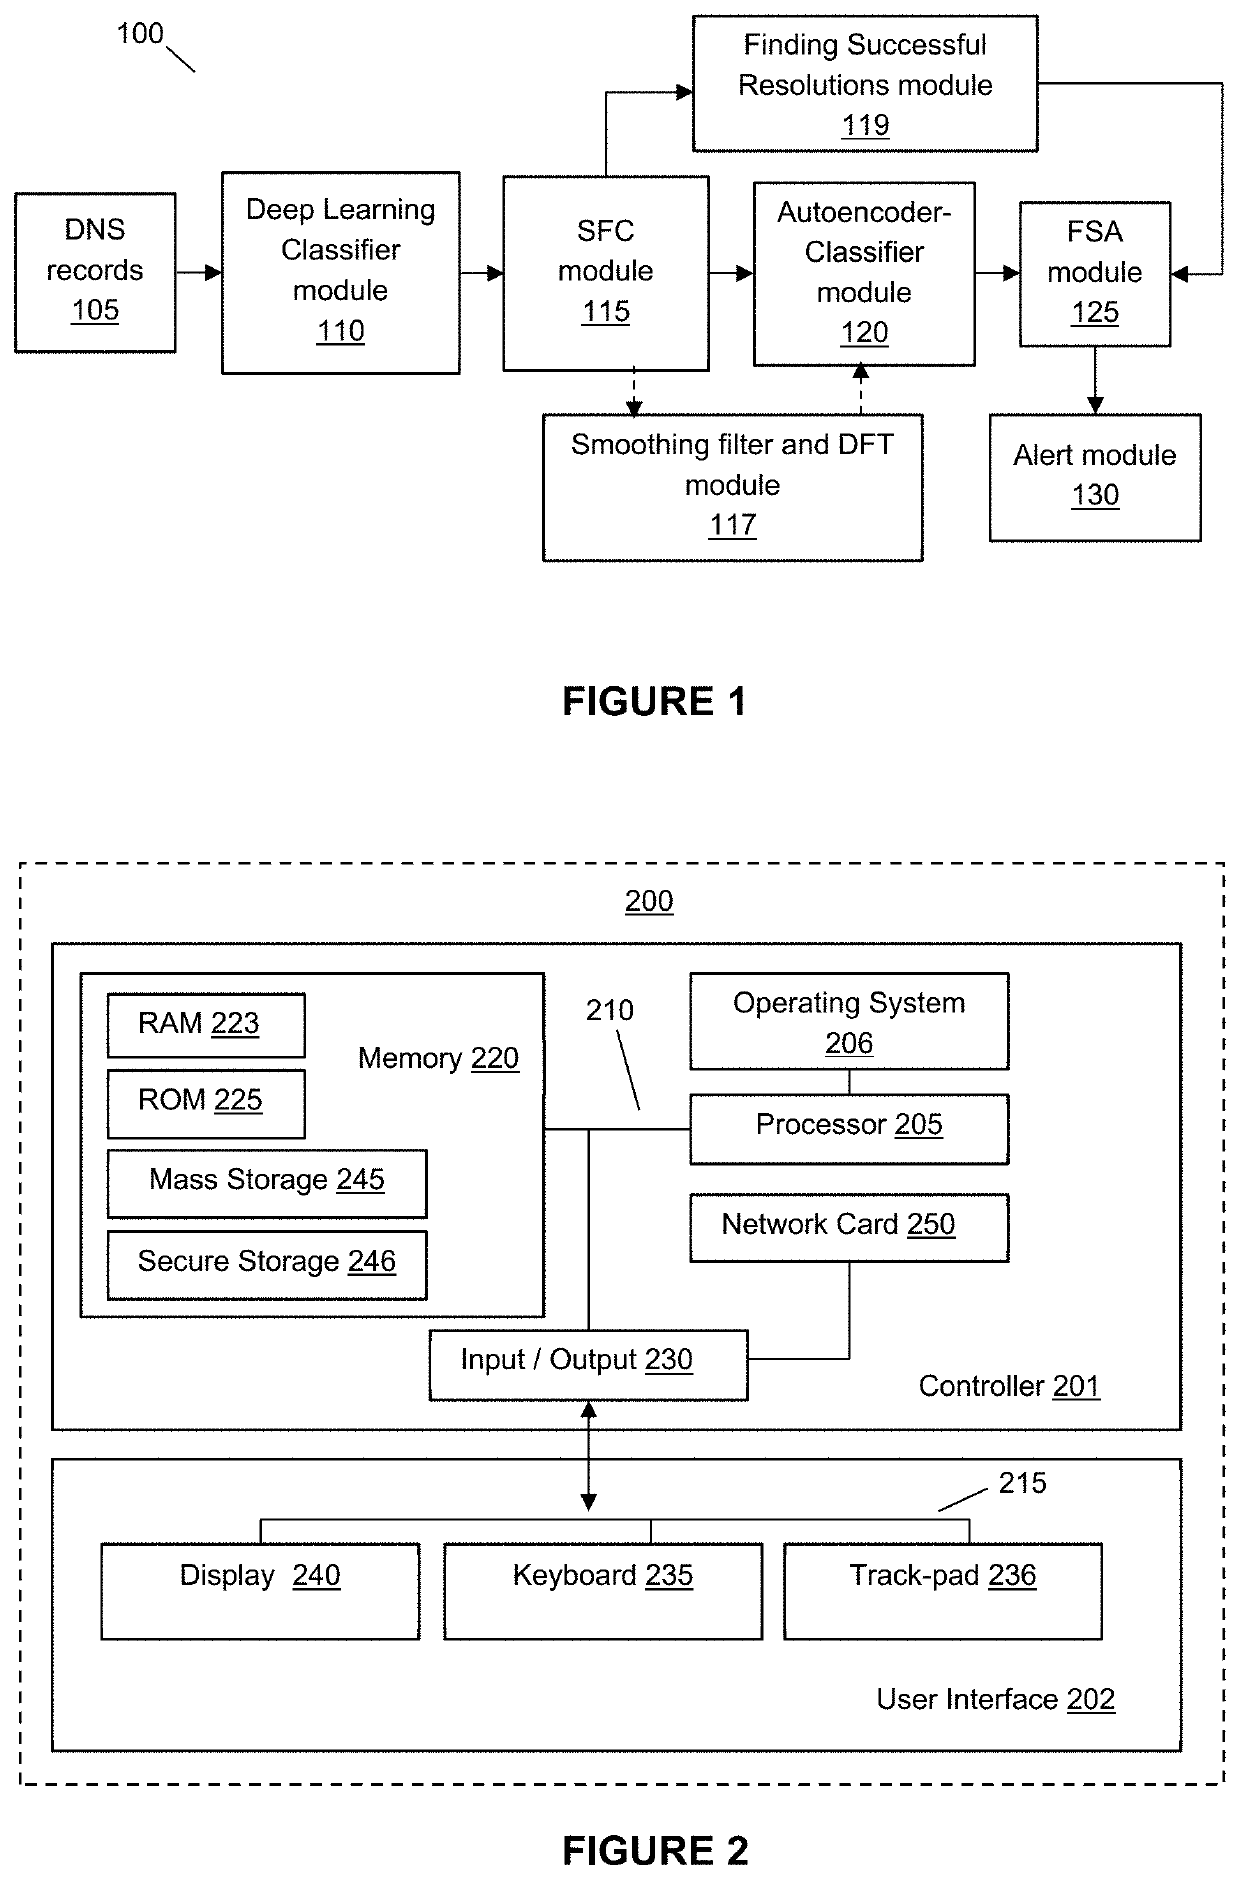 SYSTEM AND METHOD FOR DETECTING DOMAIN GENERATION ALGORITHMS (DGAs) USING DEEP LEARNING AND SIGNAL PROCESSING TECHNIQUES